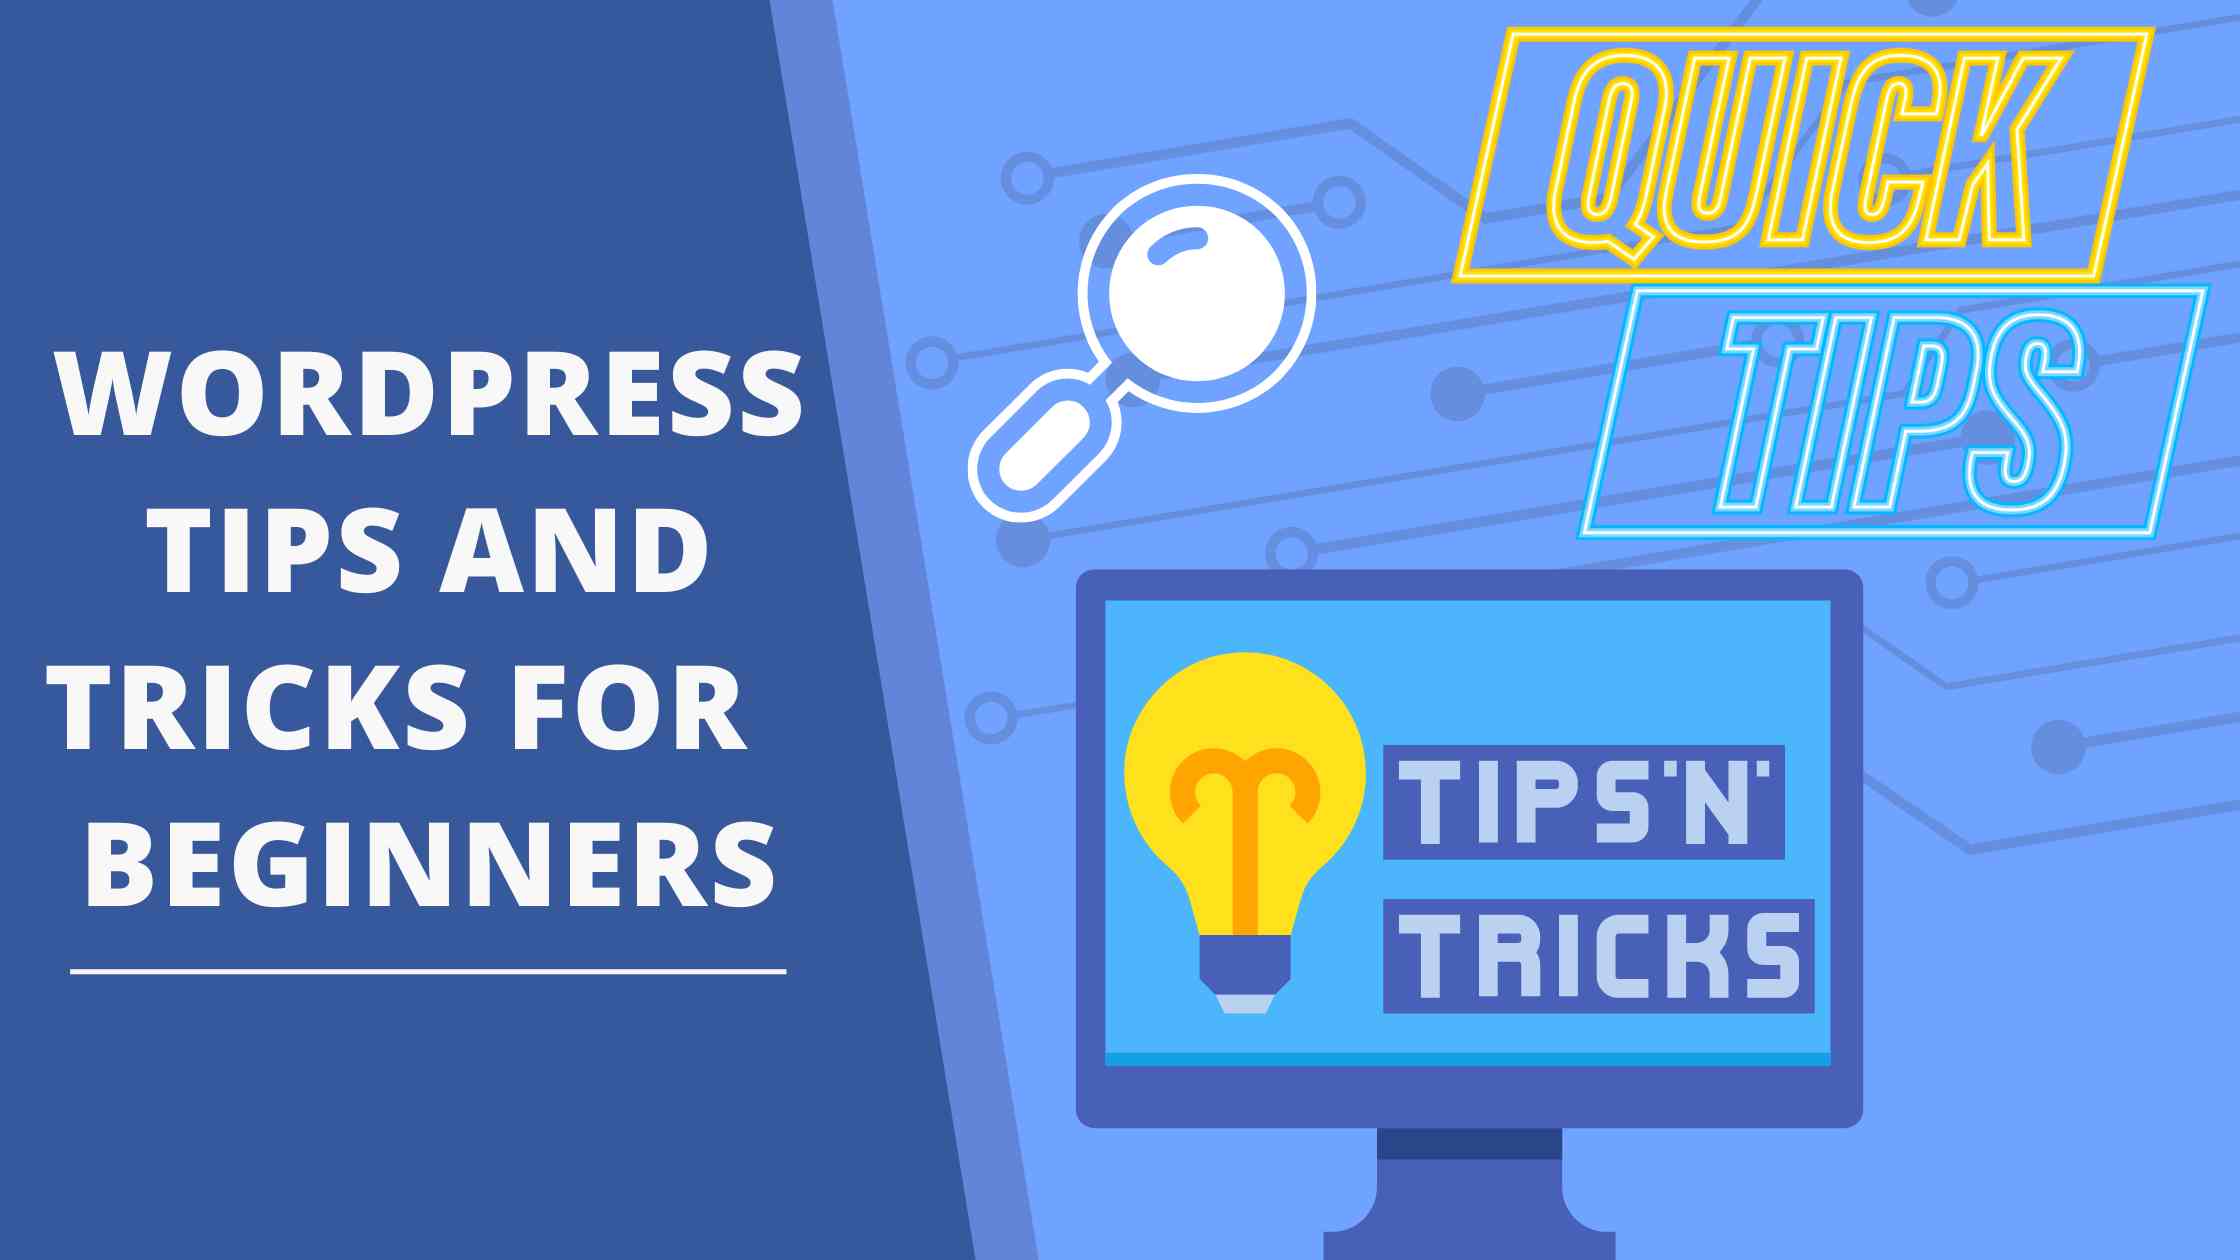 10 Amazing WordPress Tips and Tricks for Beginners